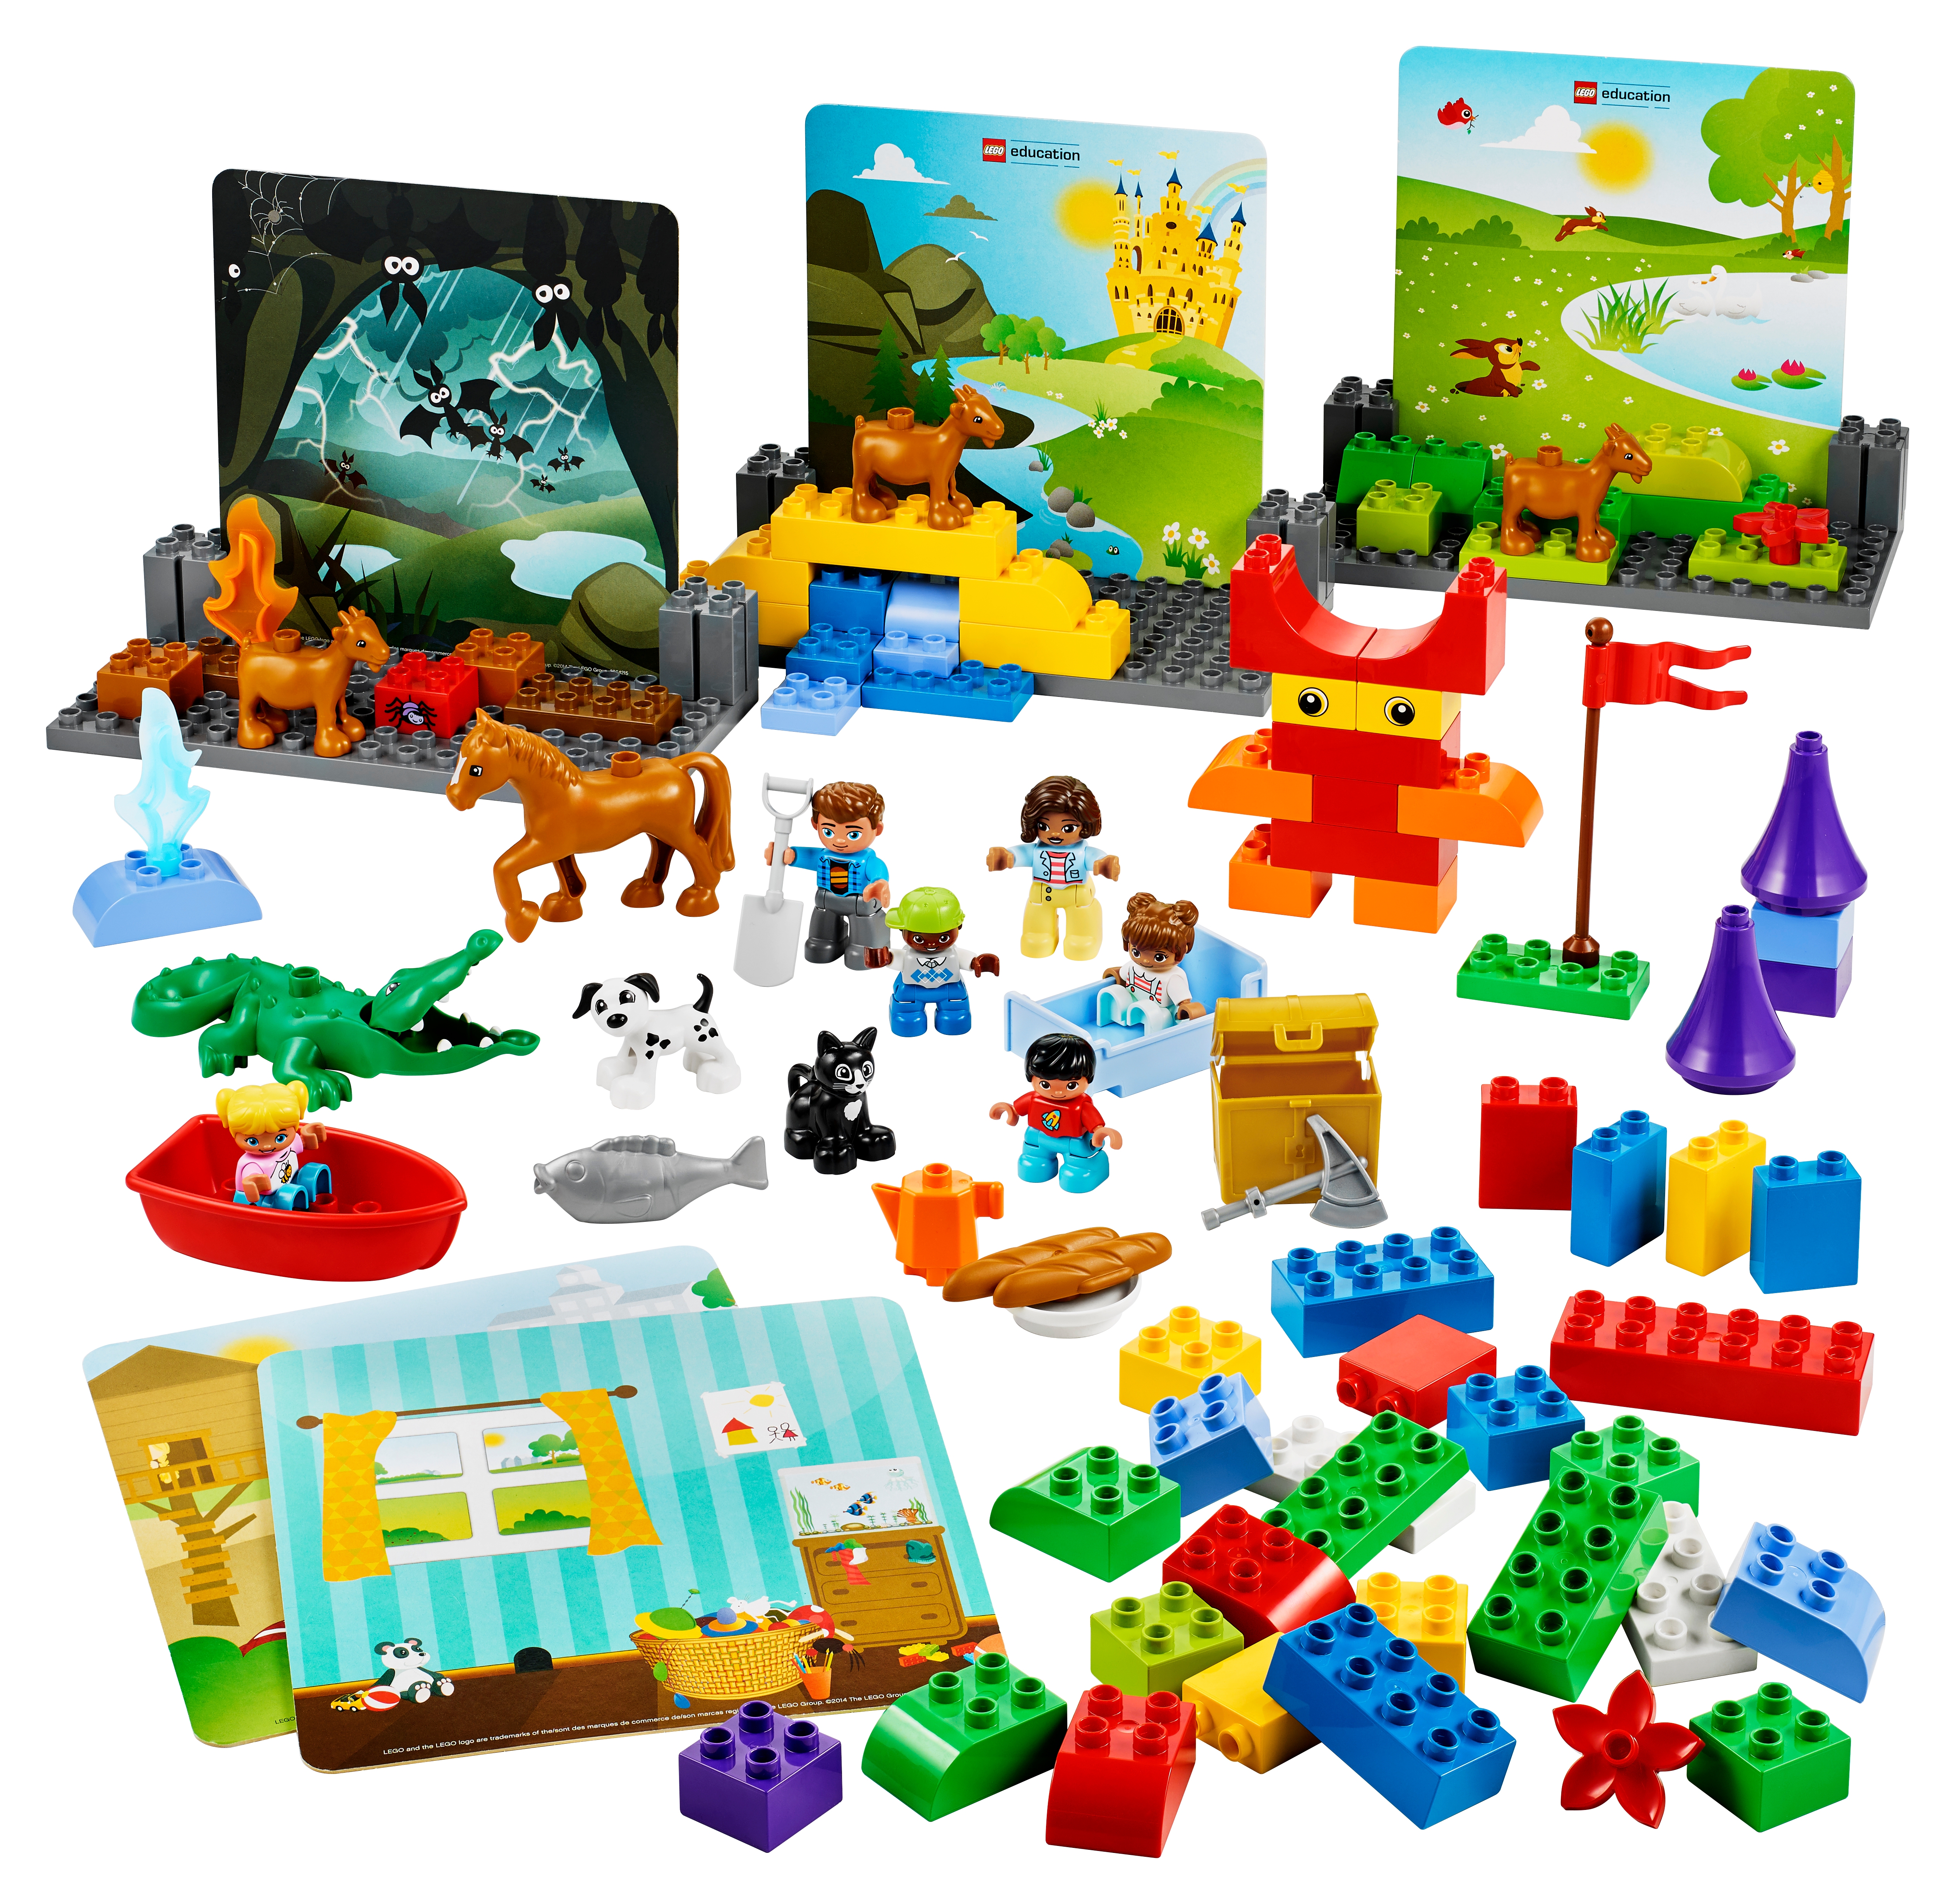 45005 | LEGO® Education Buy online at the Official LEGO® Shop US